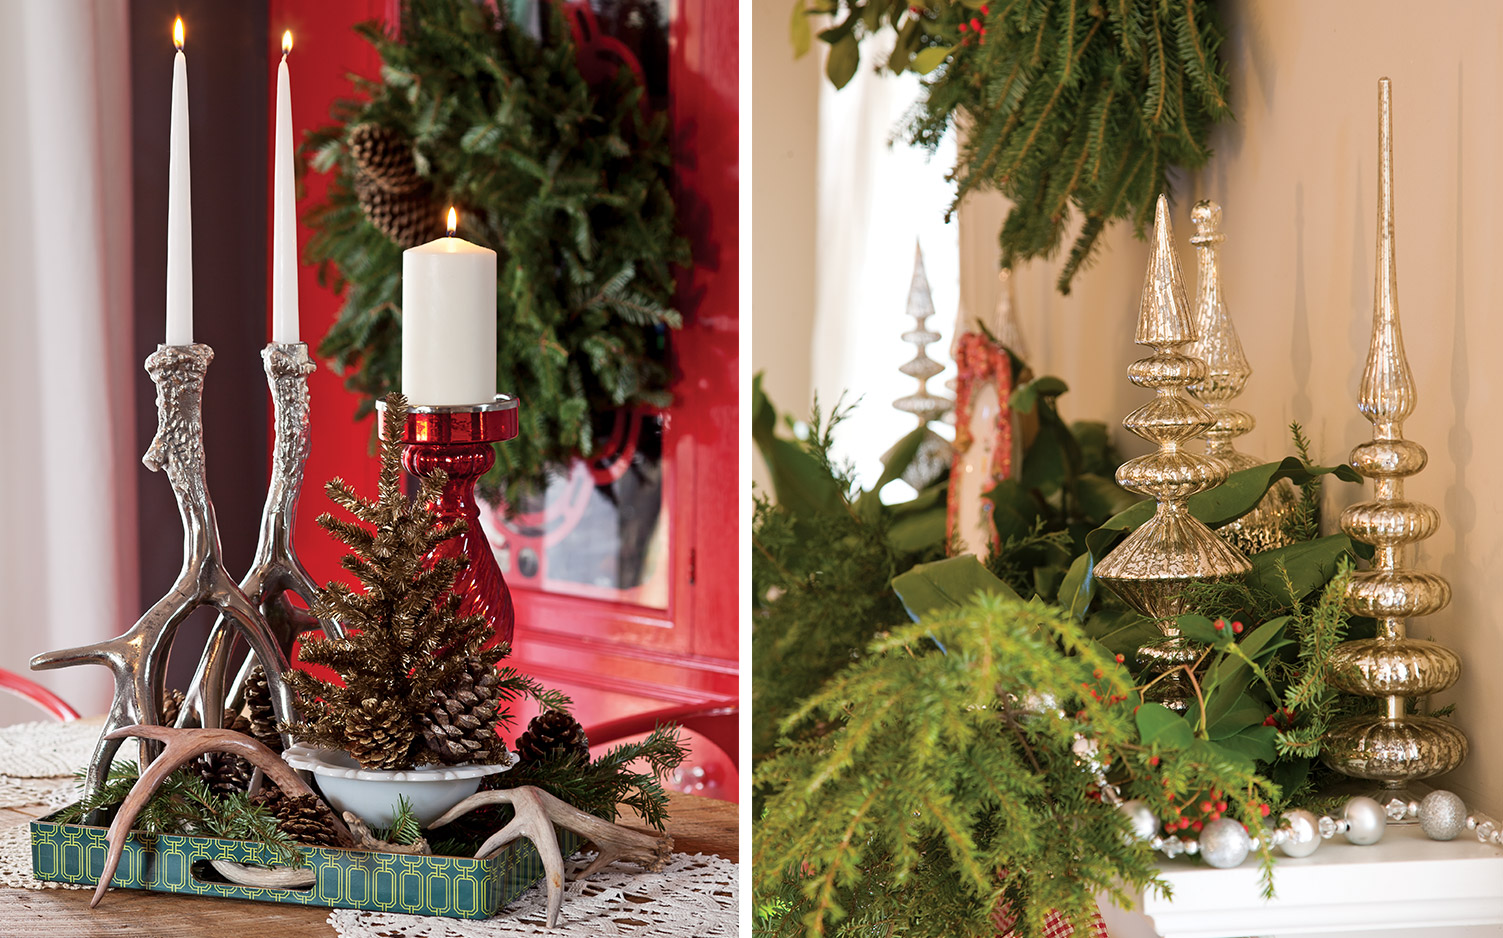 Entertaining Touches for the Holidays